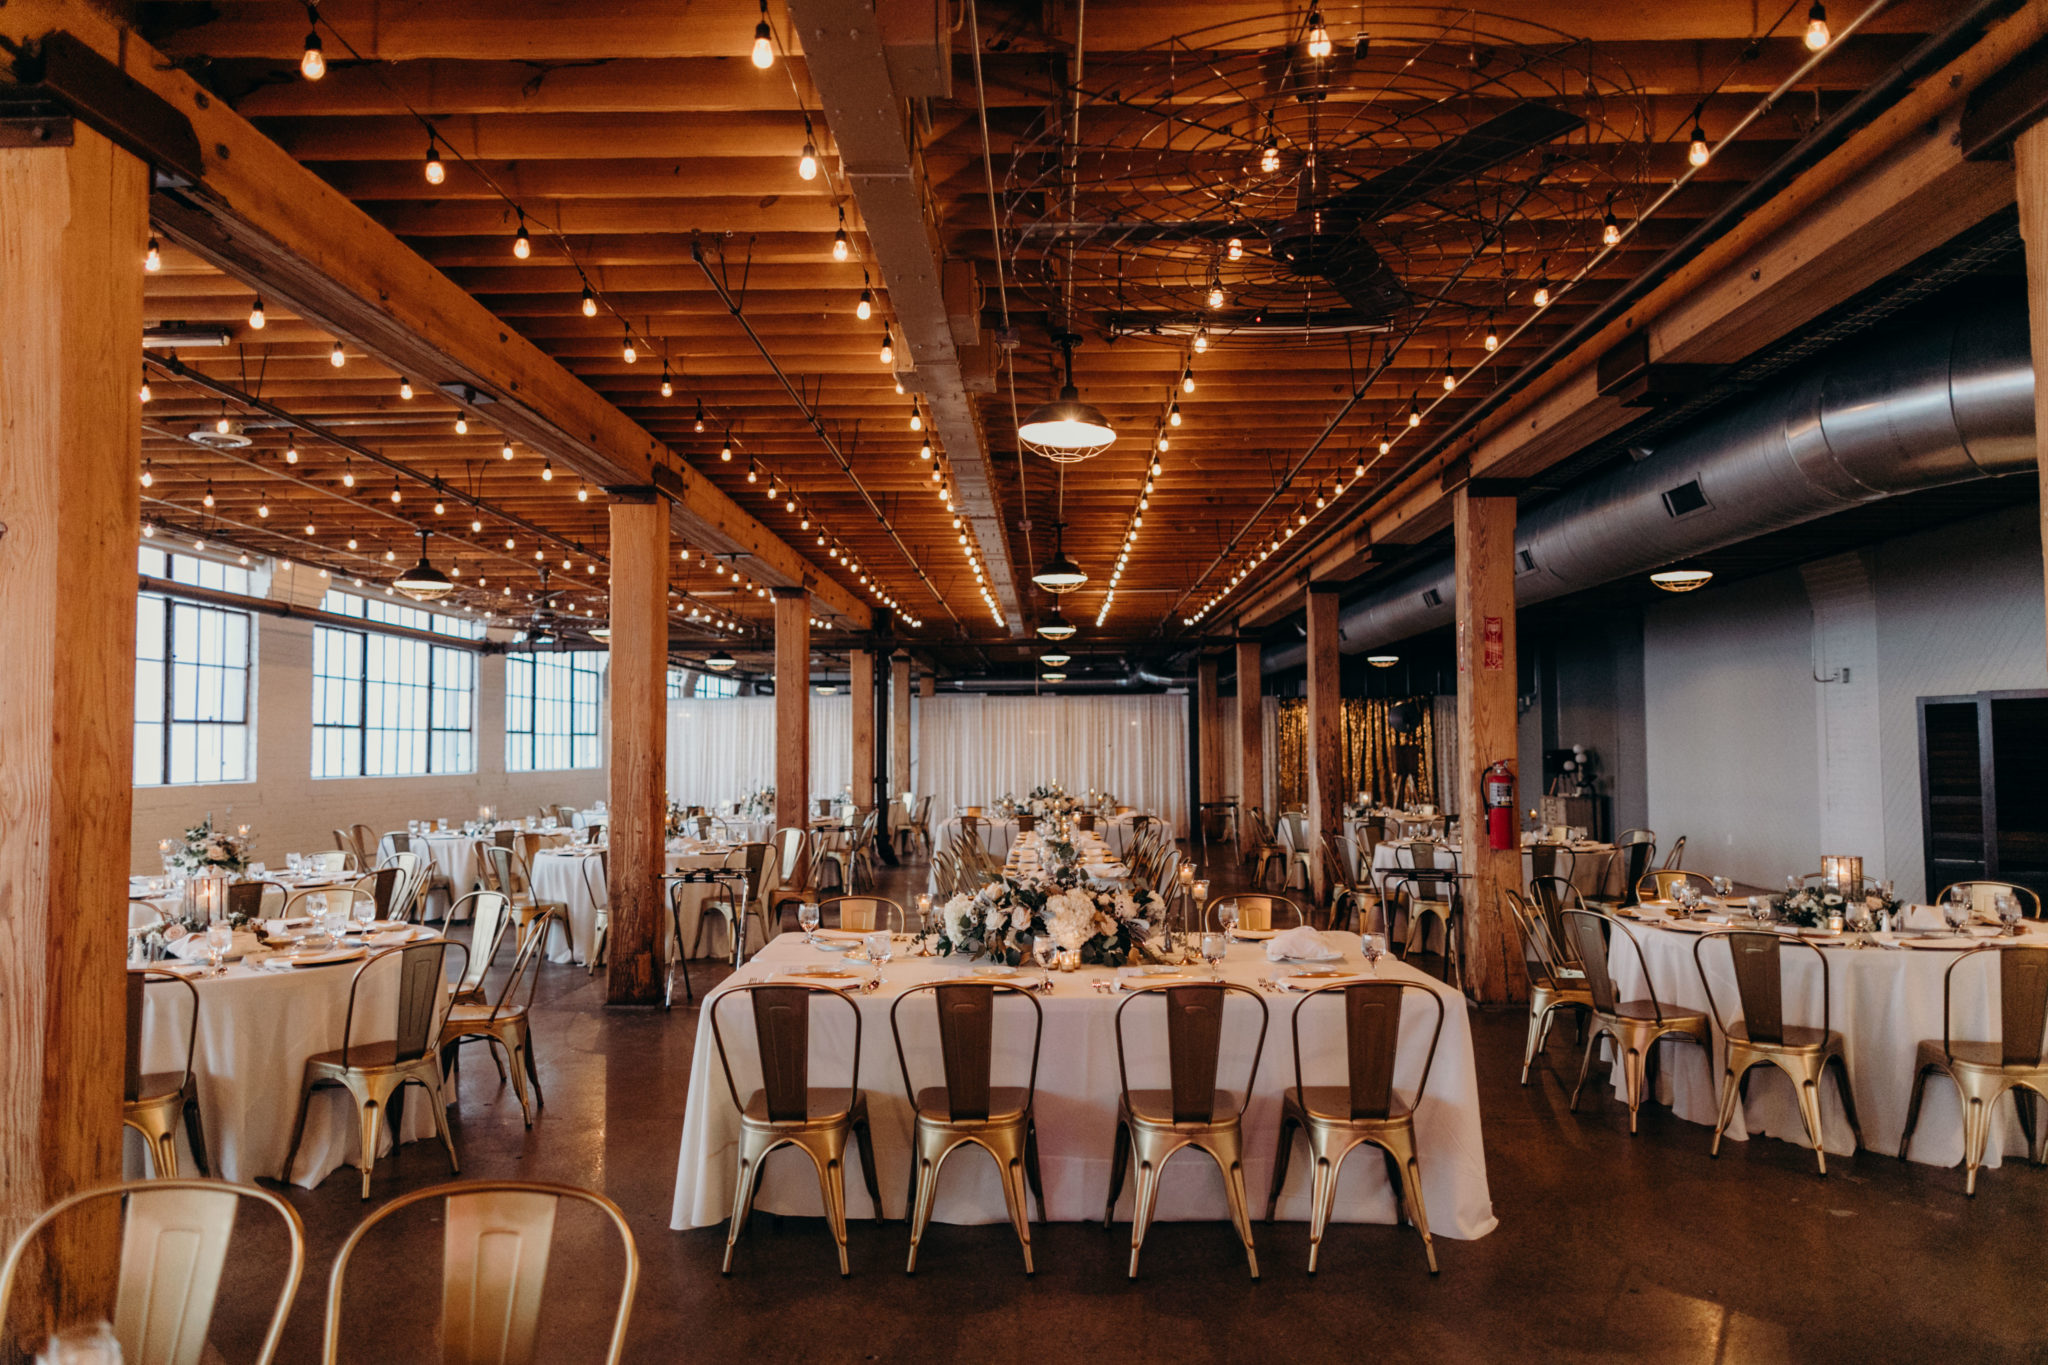 Best Wedding Venues In Grand Rapids Mi of all time The ultimate guide 